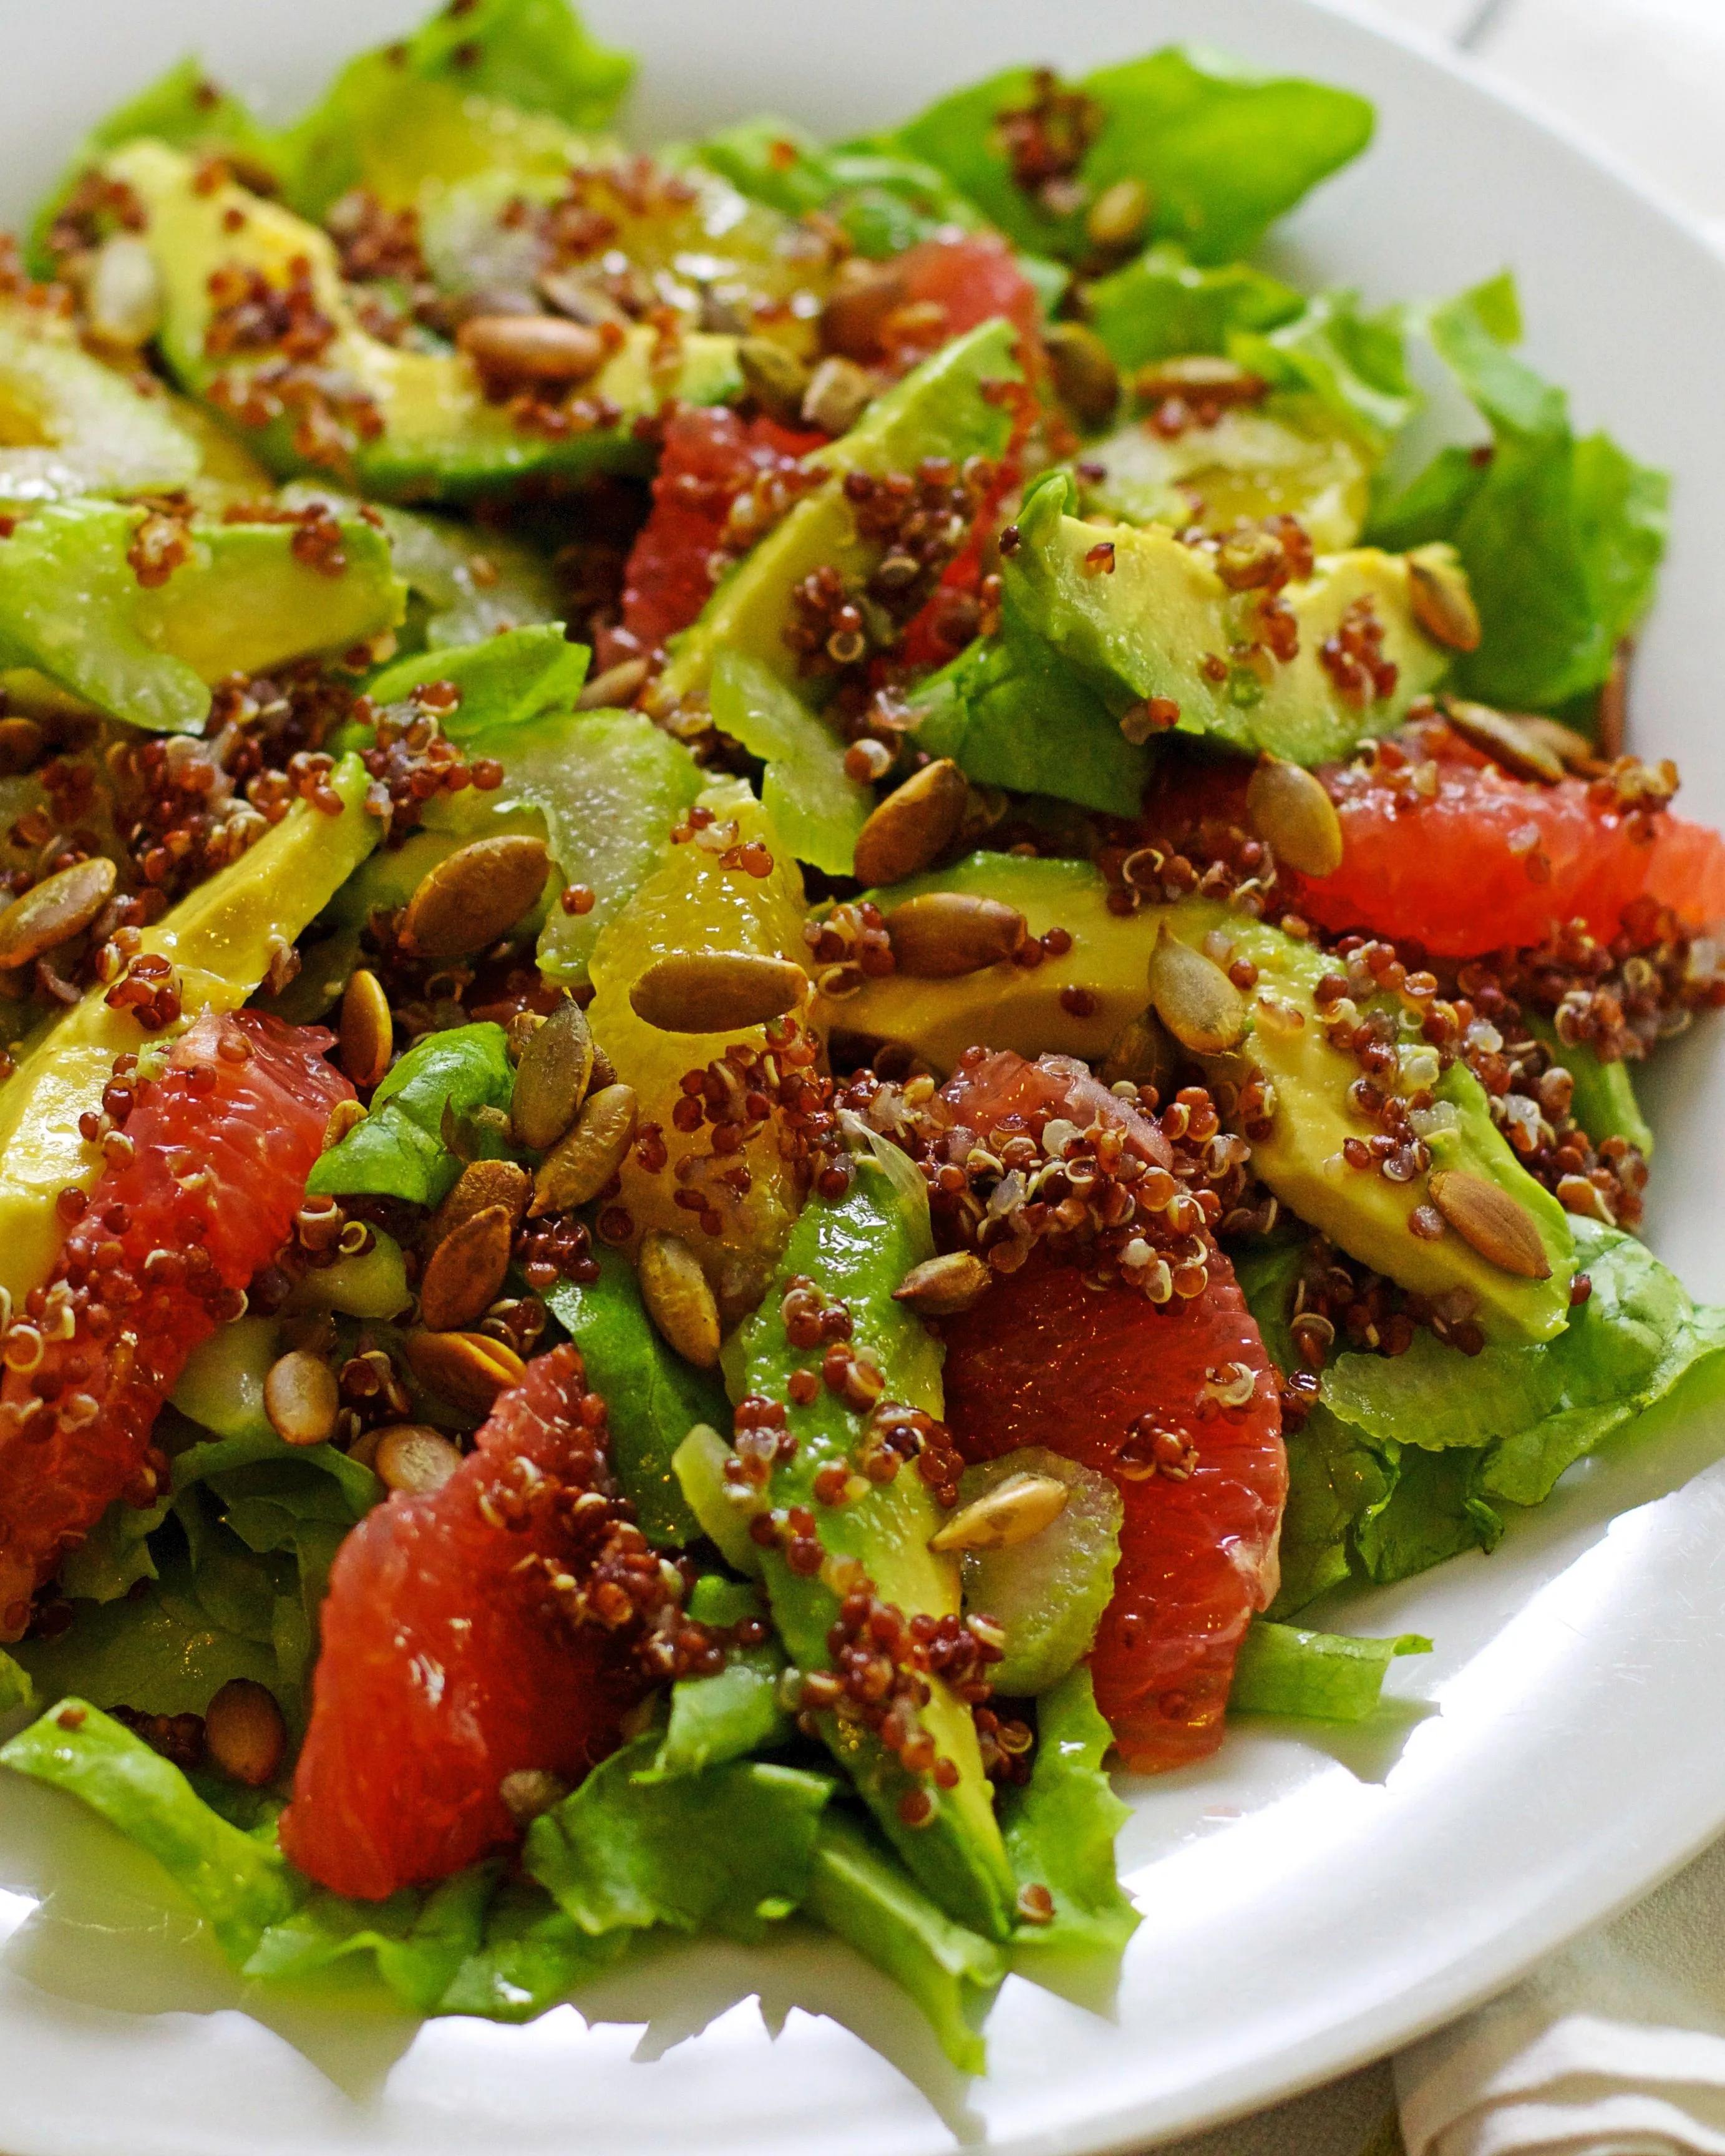 This salad is a full meal! The red quinoa looks great and tastes ...